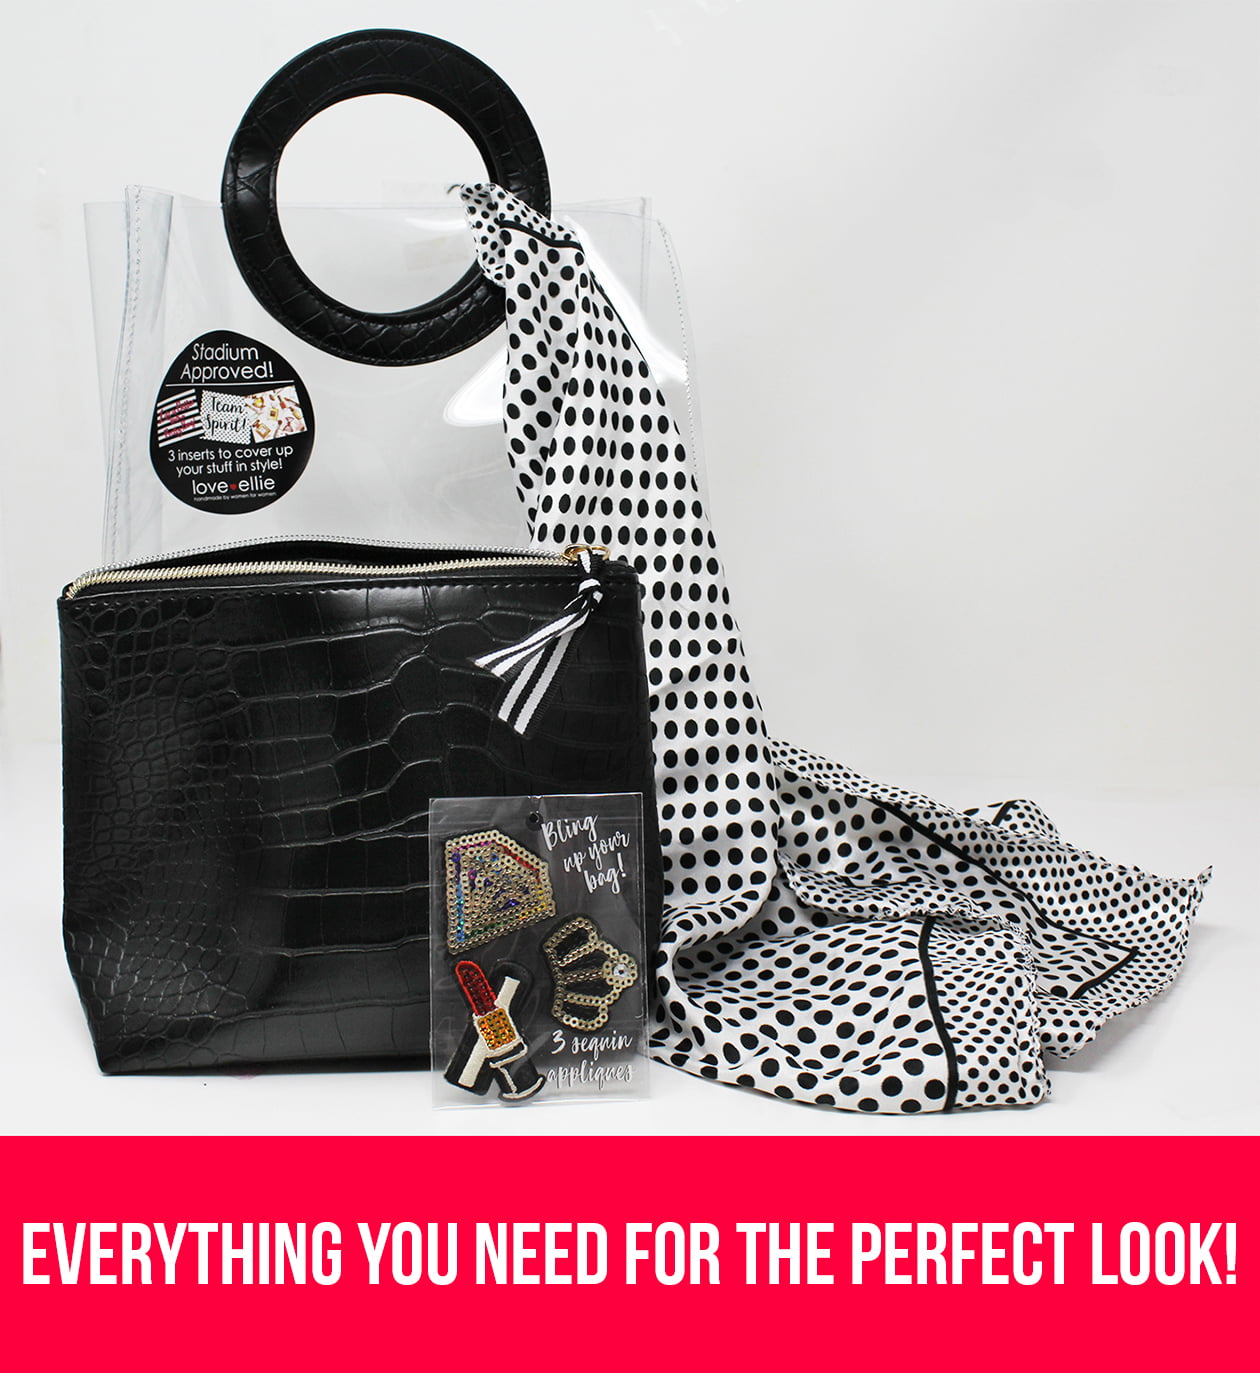 Clear Stadium Approved Tote Bag, Hallie, with Scarf and Decals, by Love  Ellie (Black) 